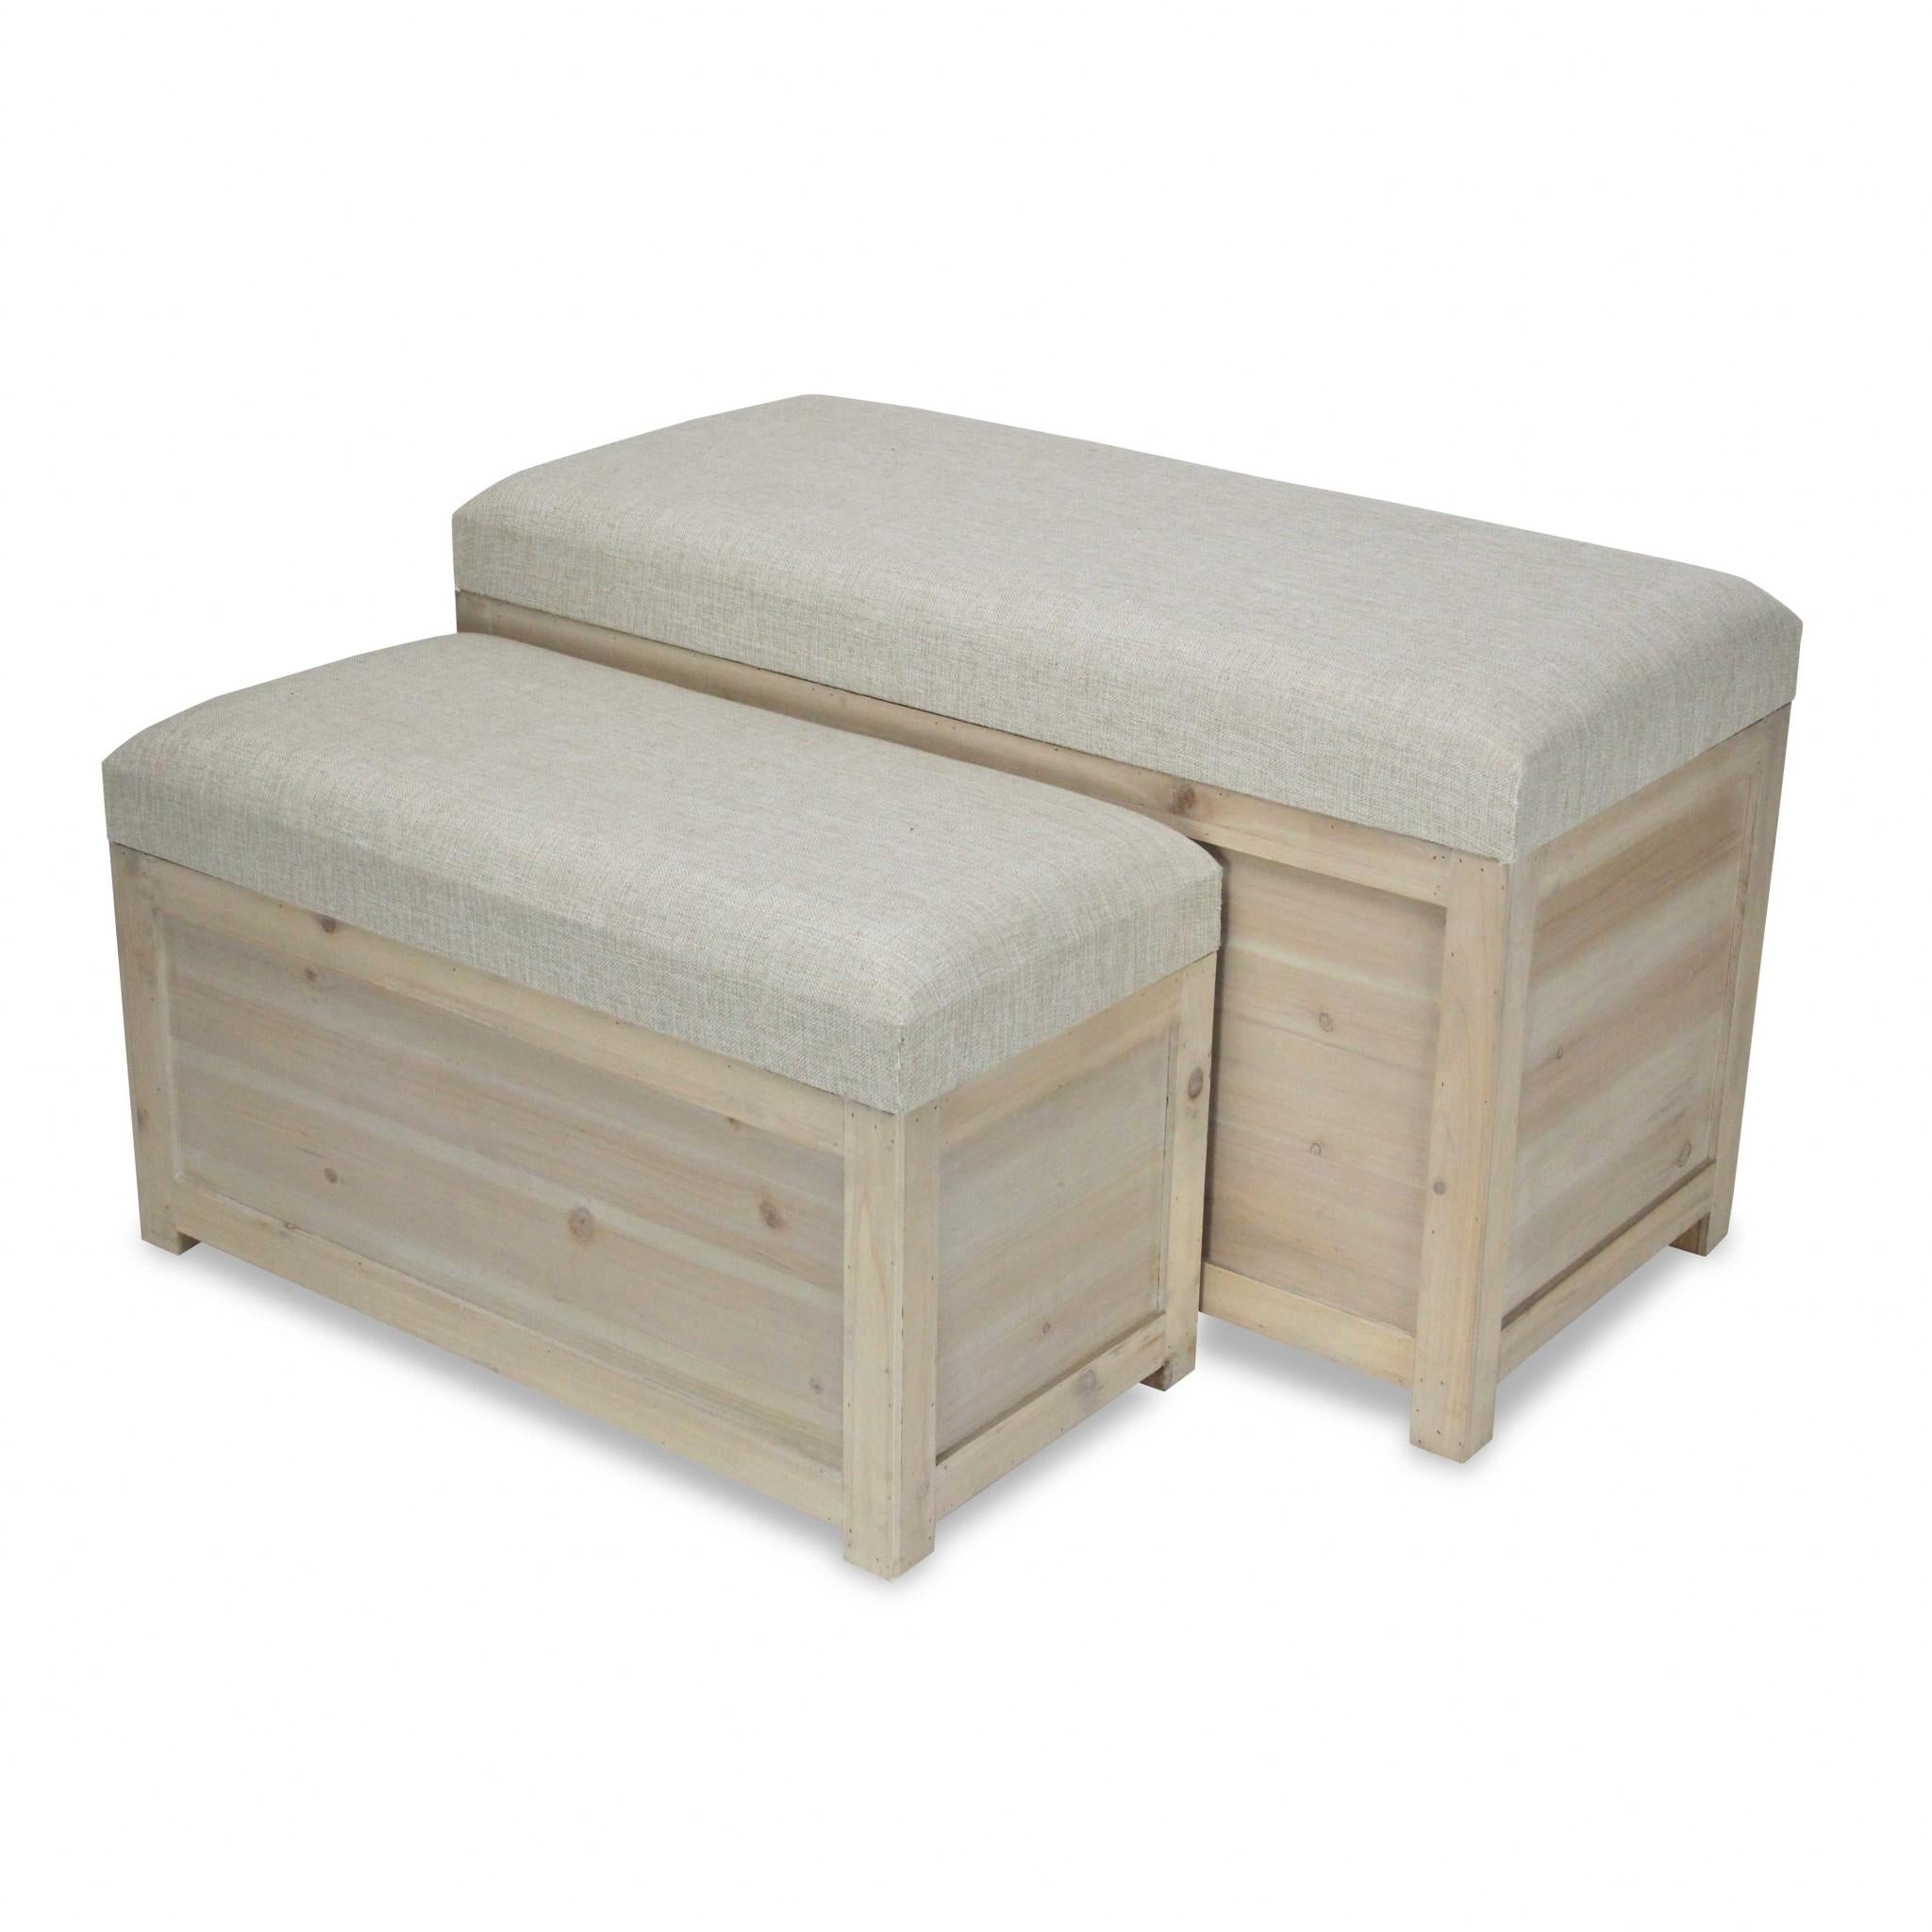 Set of 2 Rectangular White Linen Fabric and Wood Storage Benches